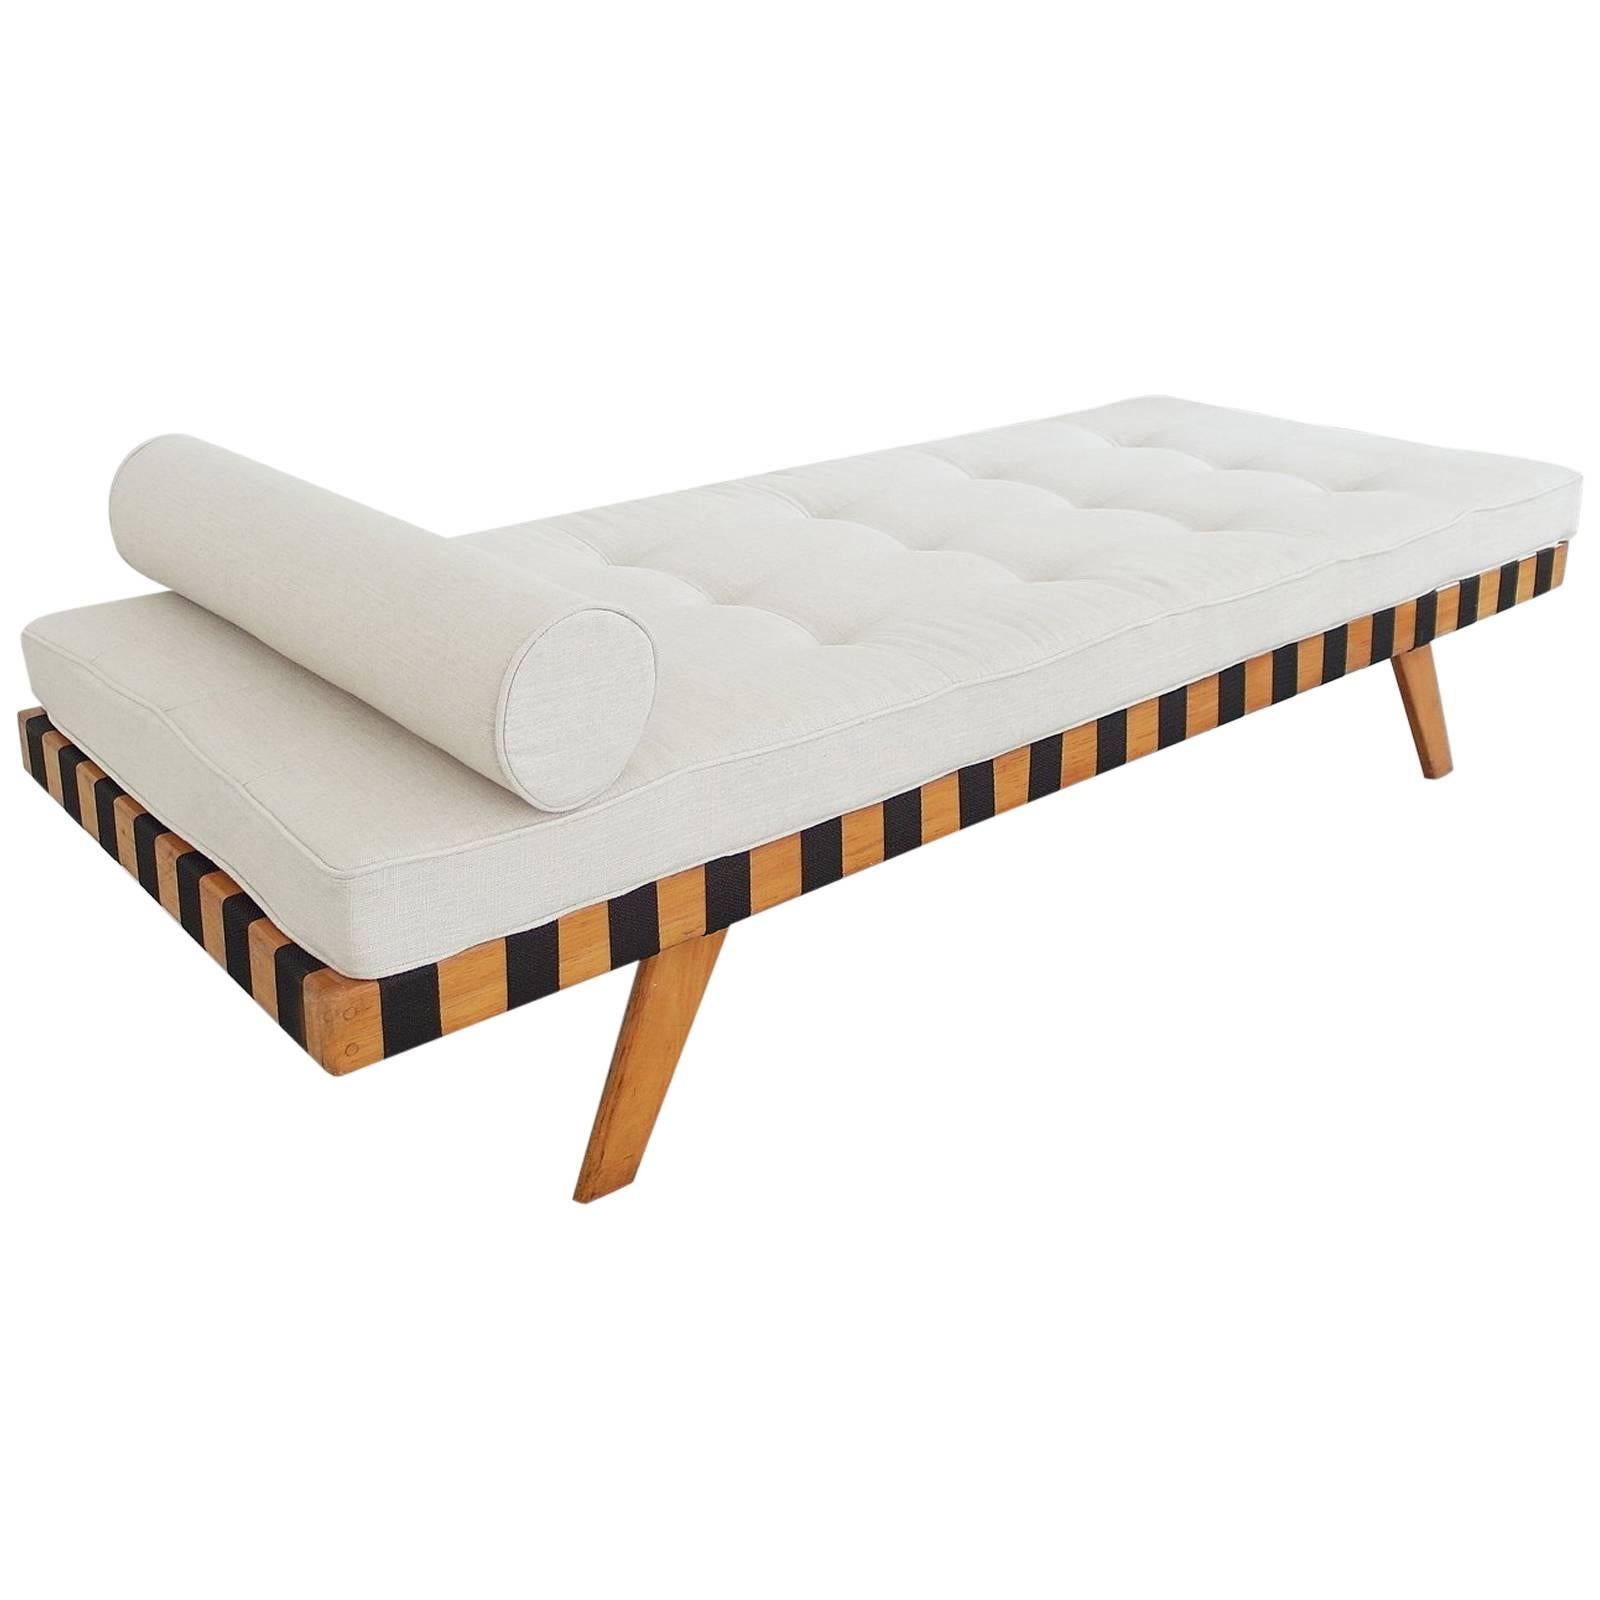 Scandinavian Mid-Century Modern Birch Wooden Daybed with Linen Upholstery, 1950s